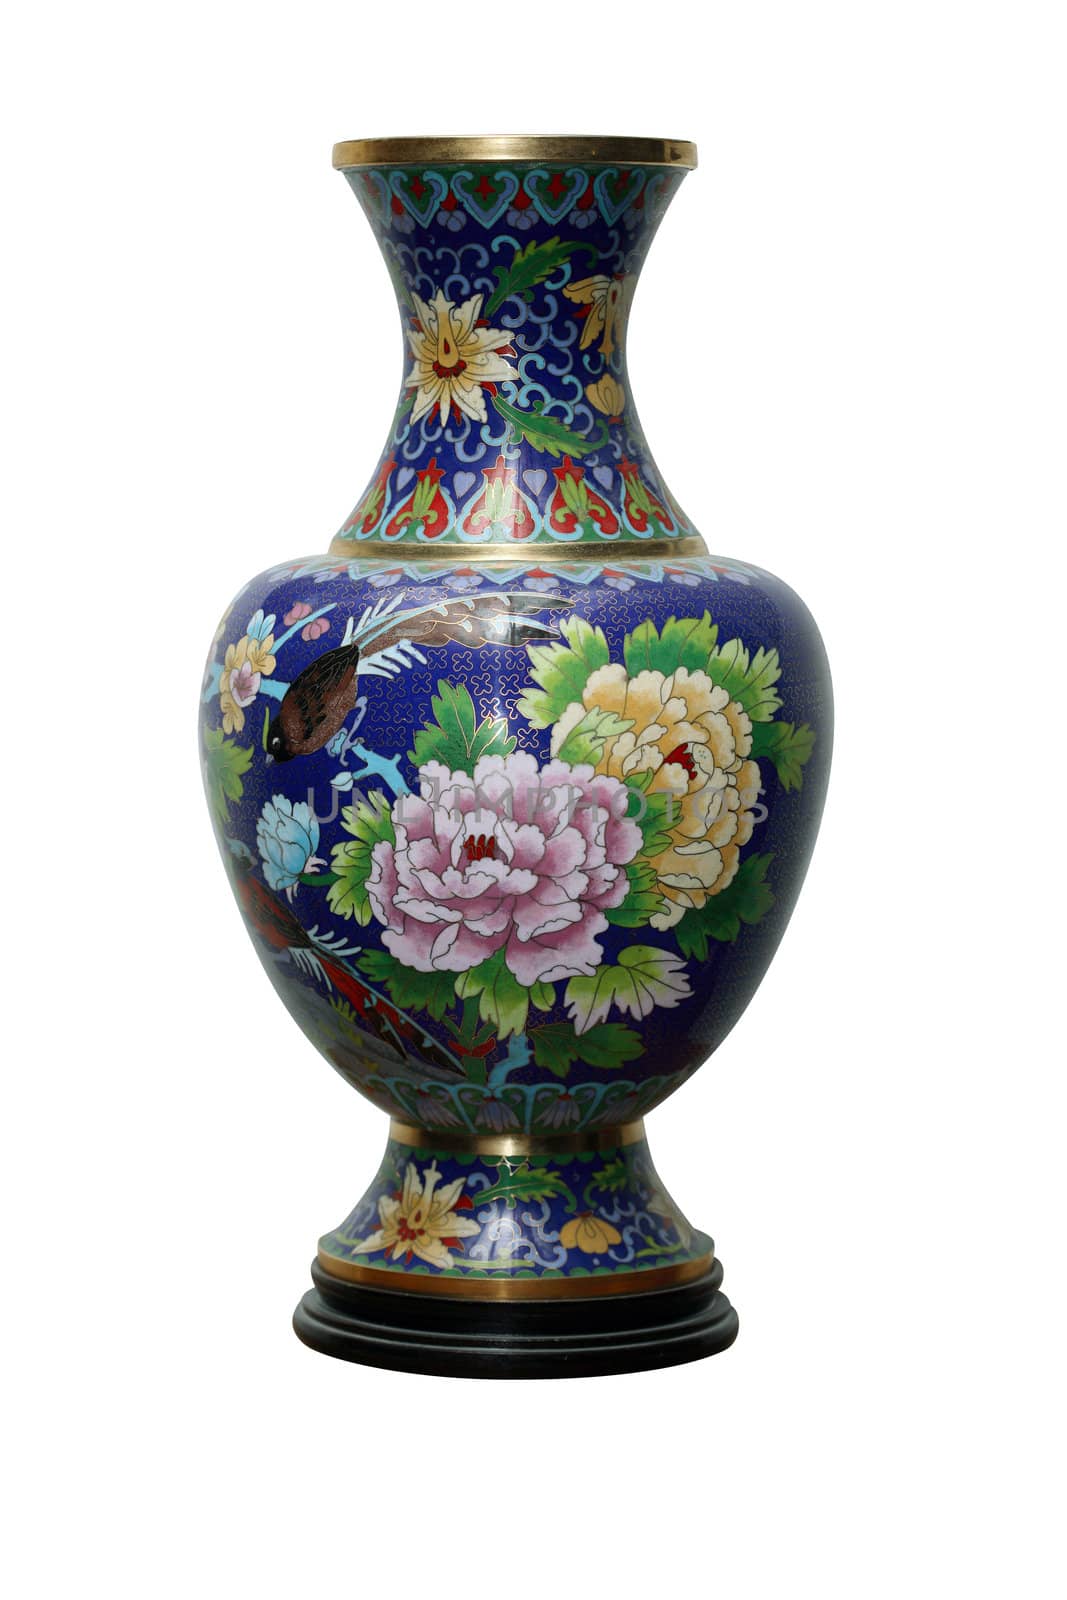 Nice ancient chinese vase isolated on a white background with clipping path
